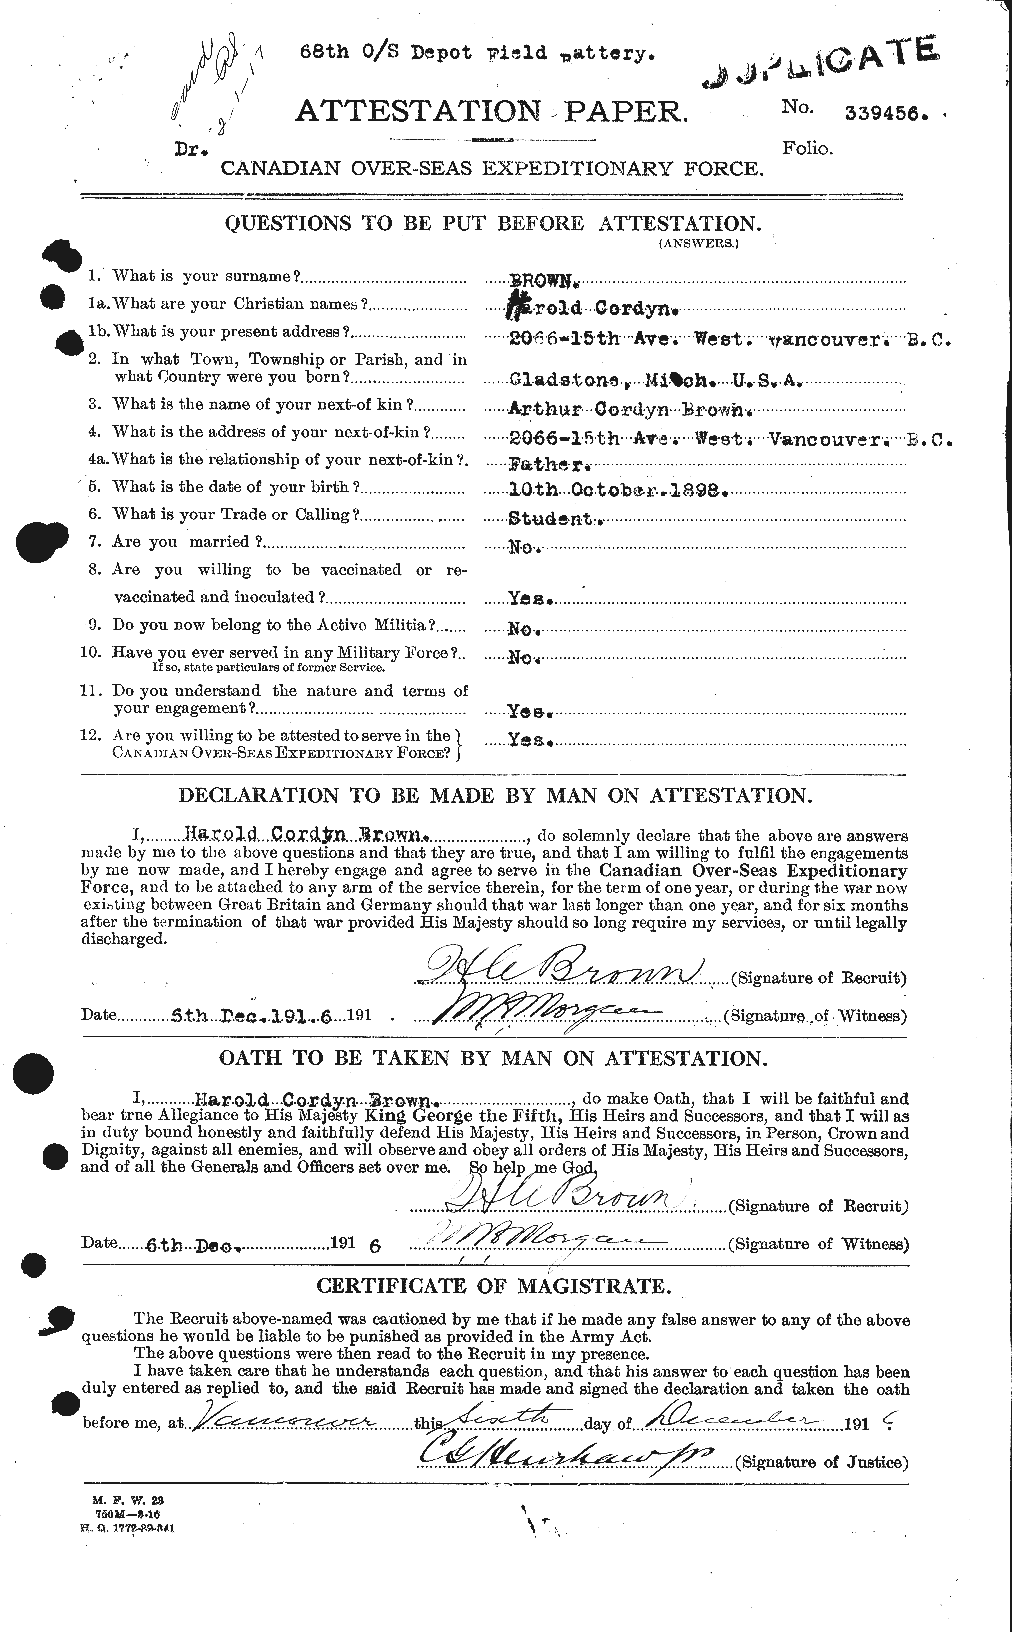 Personnel Records of the First World War - CEF 265352a